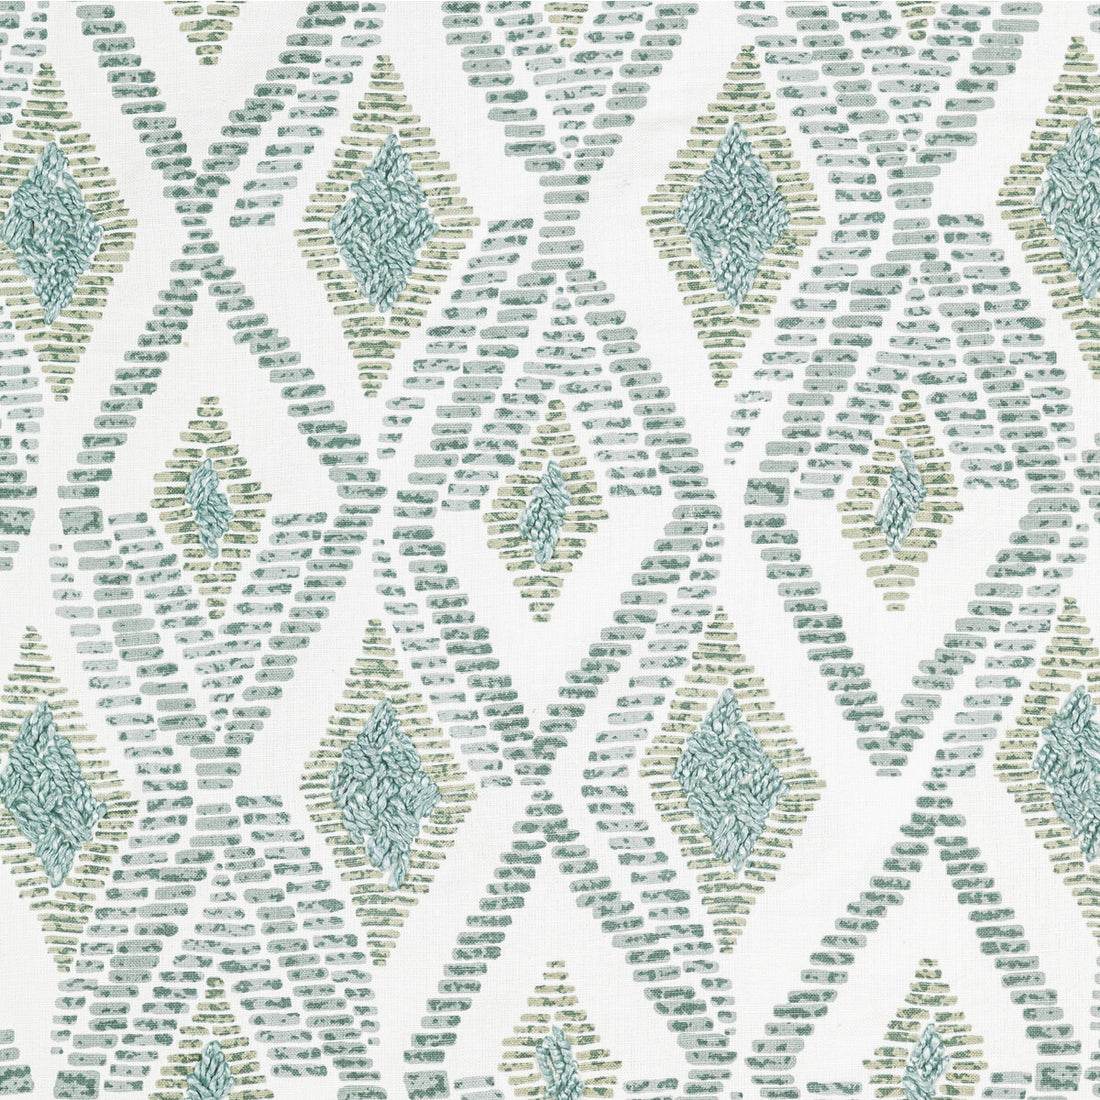 Antiparos fabric in dusk color - pattern ANTIPAROS.1611.0 - by Kravet Design in the Nadia Watts Gem collection